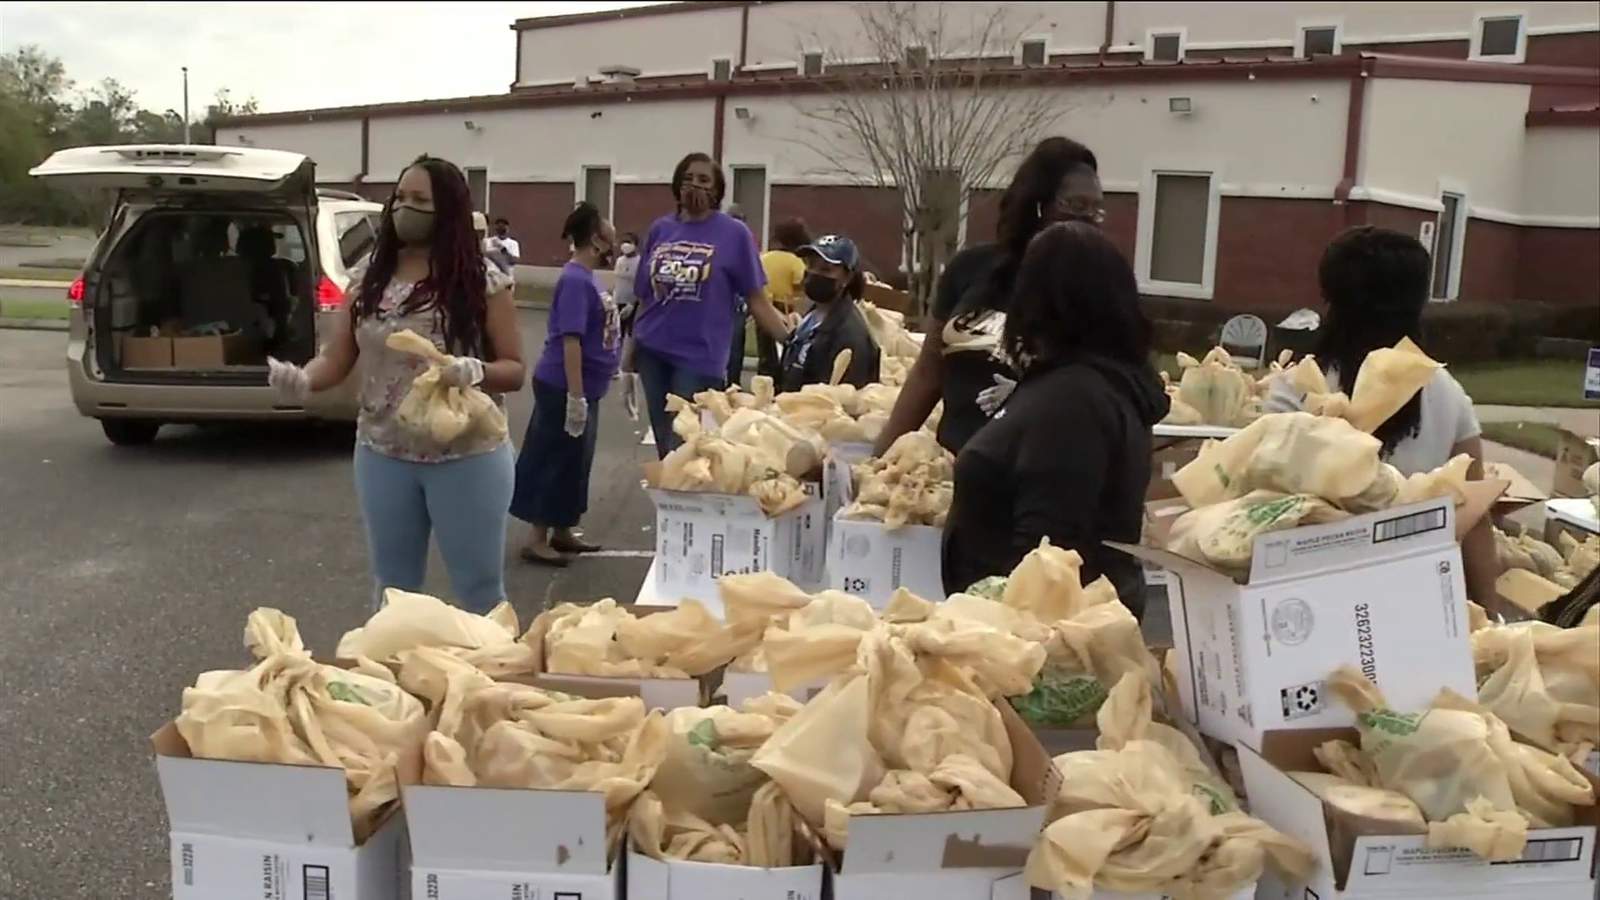 Farm Share to distribute food this week at events across Northeast Florida